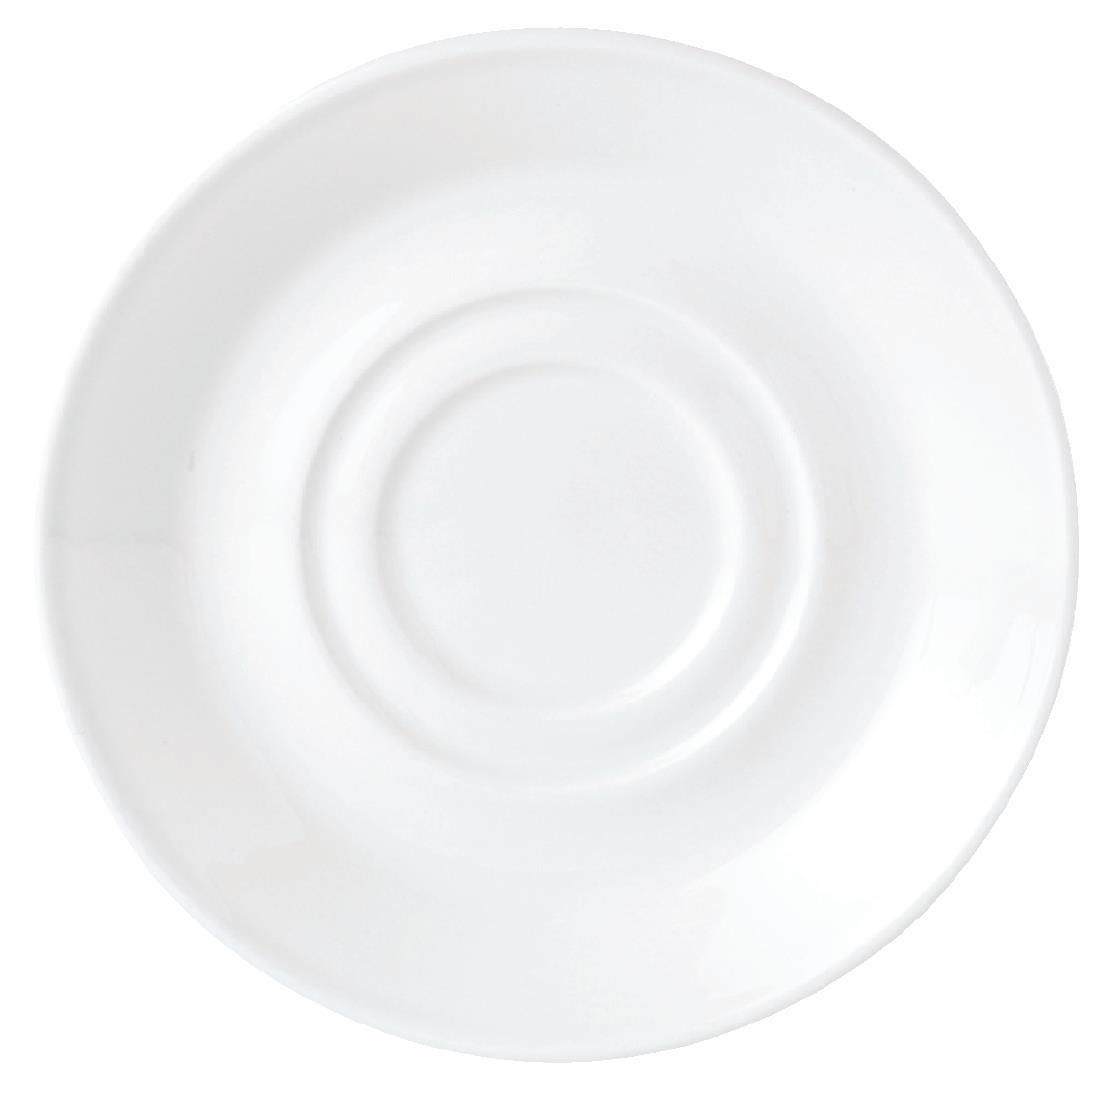 Steelite Simplicity White Low Cup Saucers 145mm (Pack of 36) - V0044  - 1